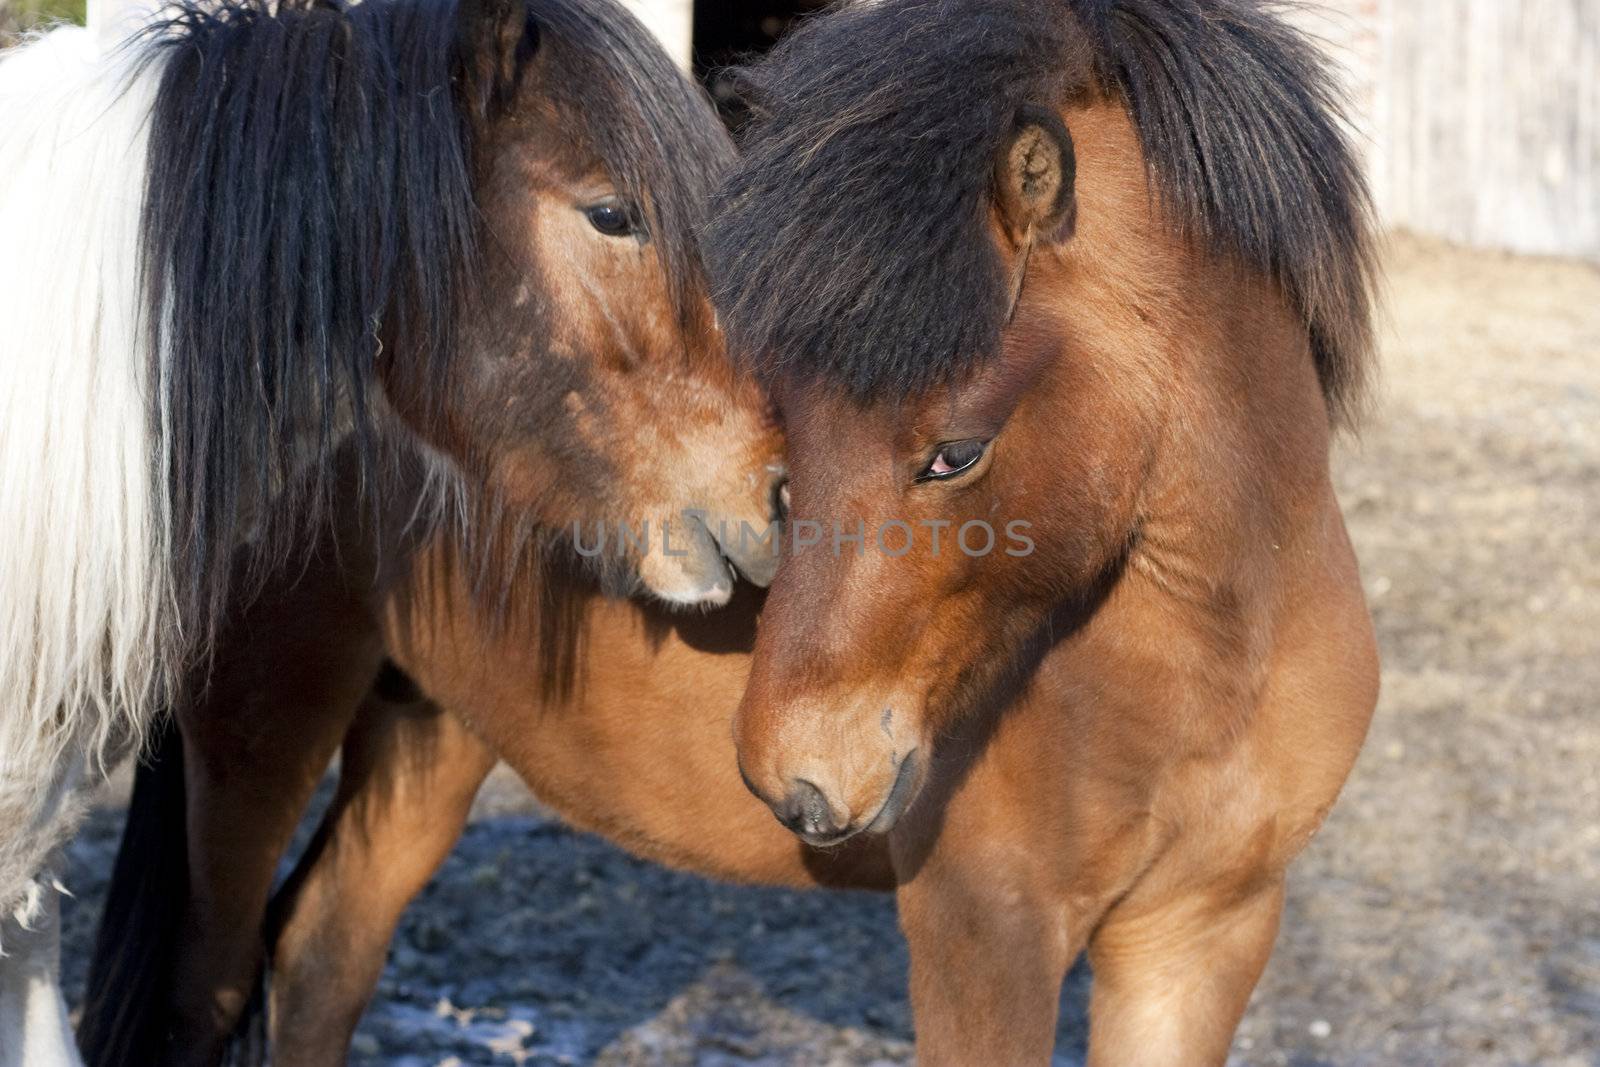 Two horses standing close to each other